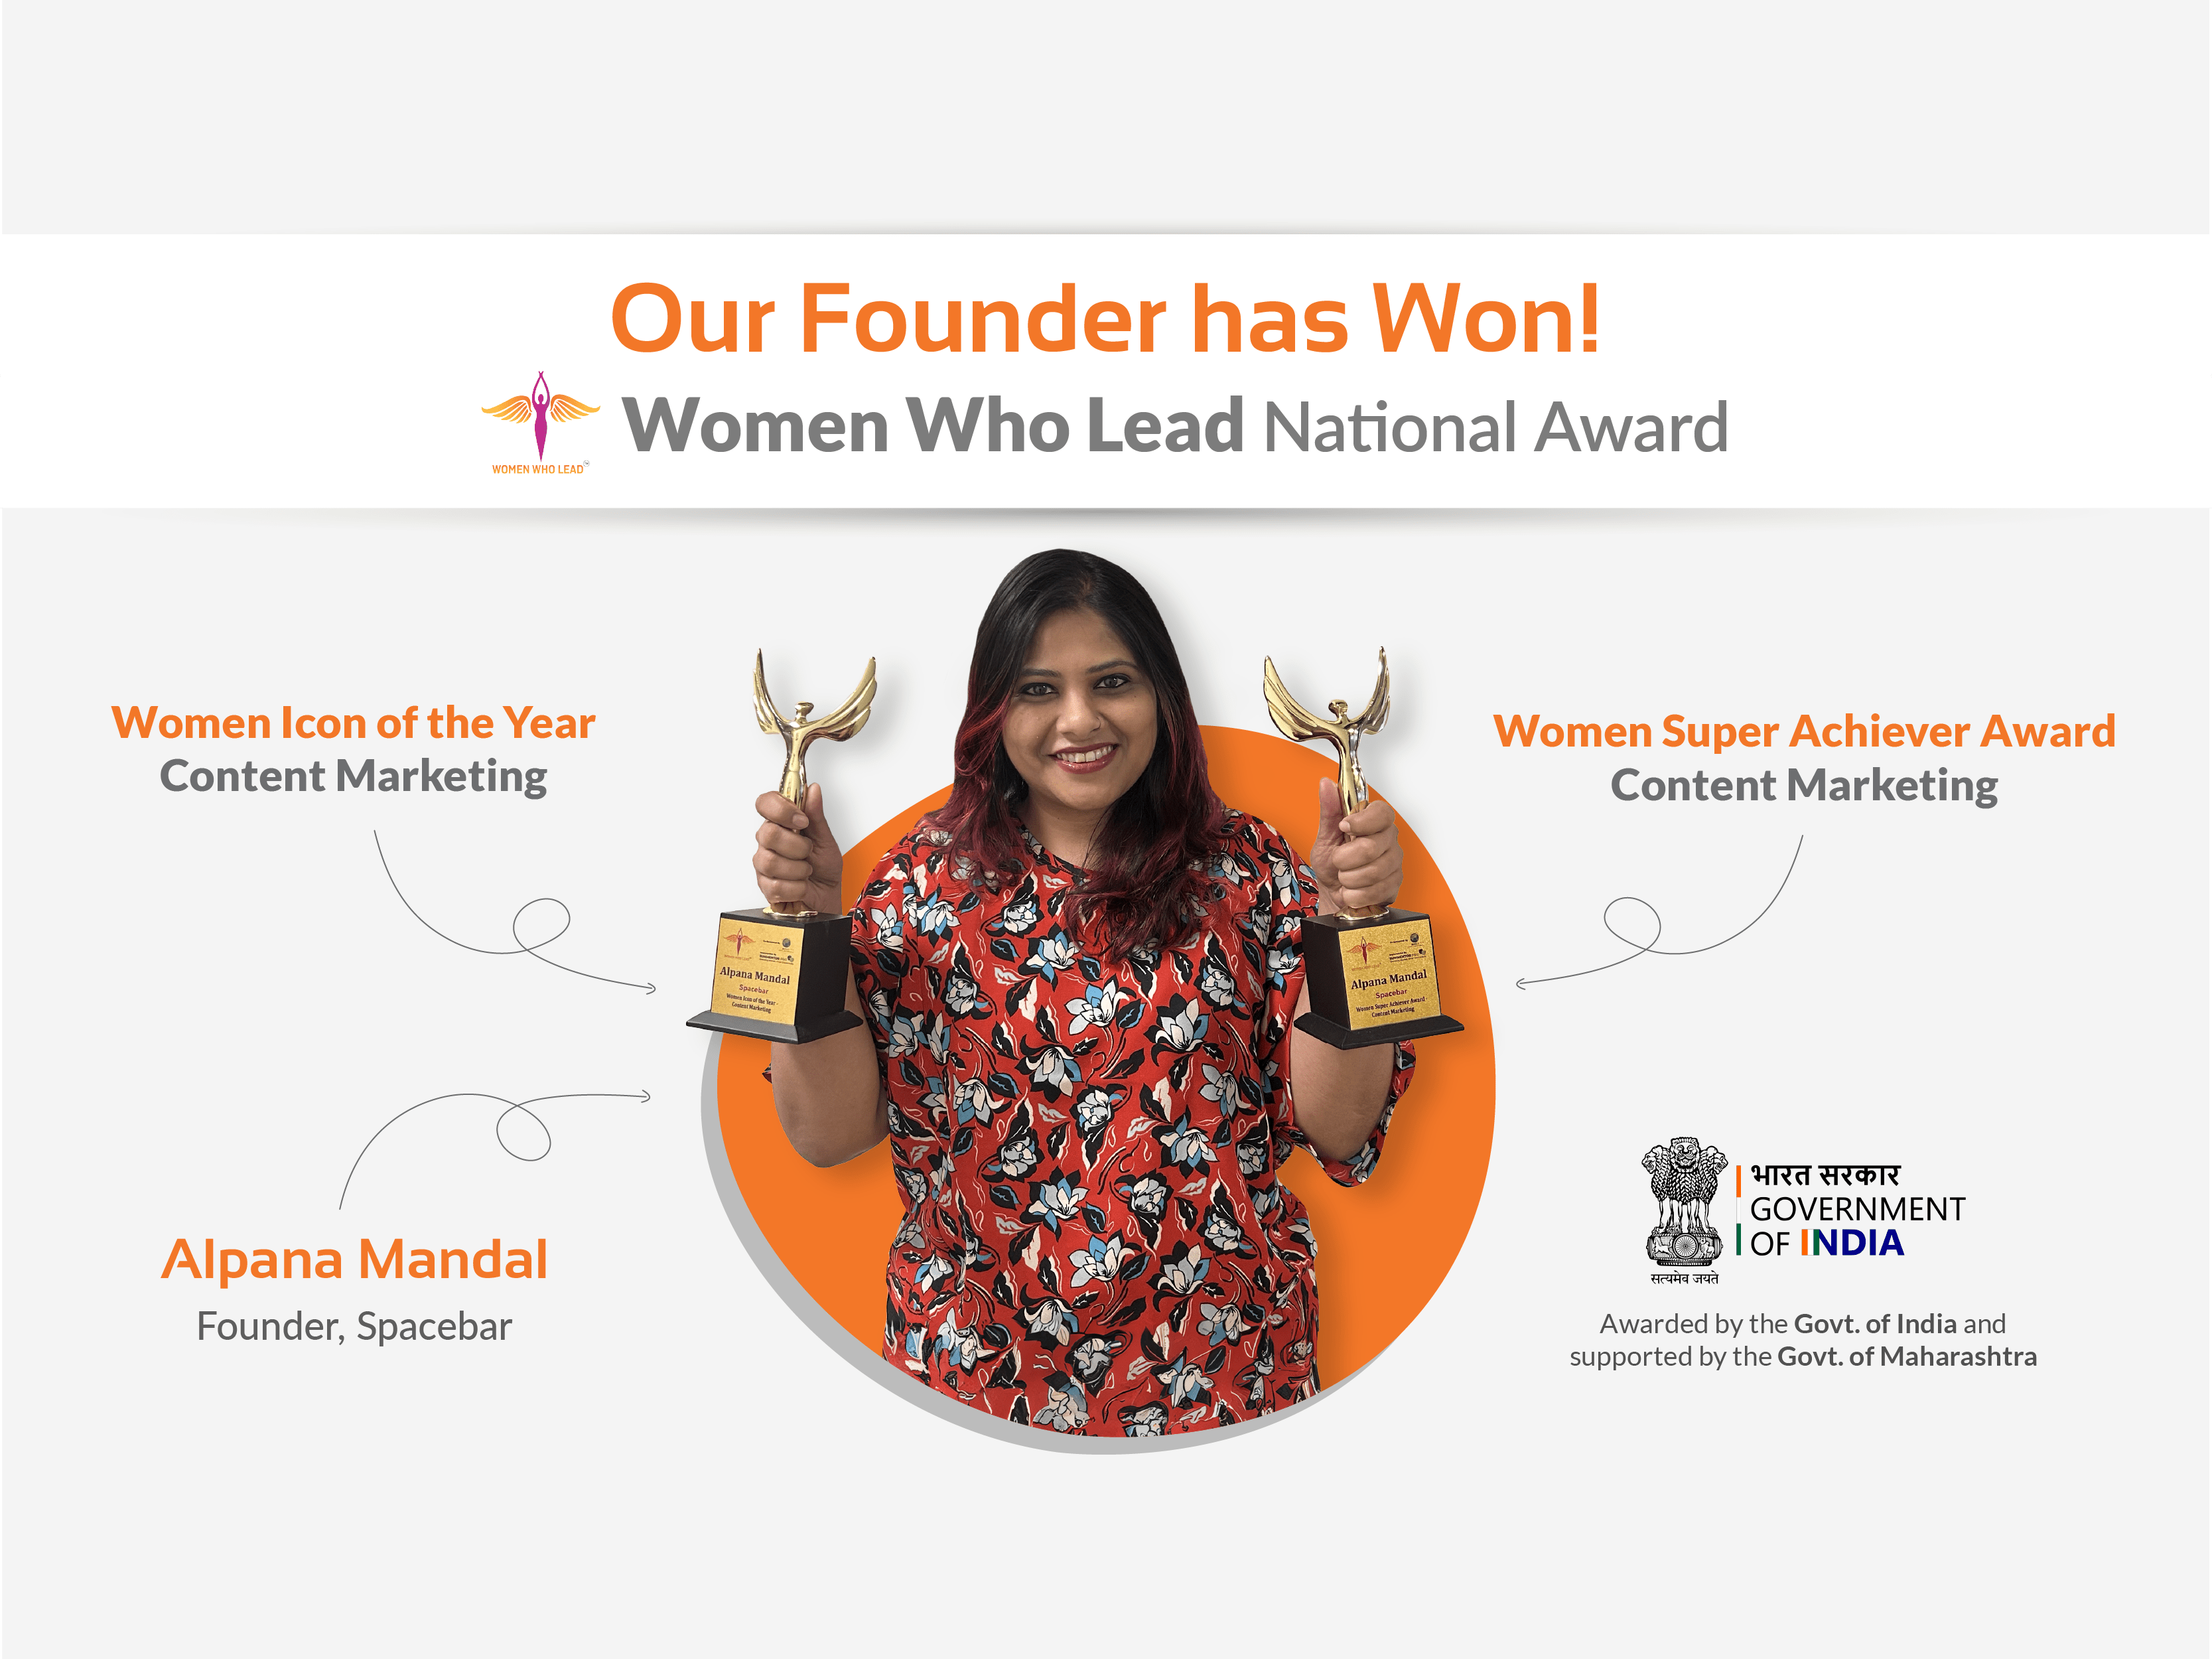 Our Founder has won the Women Who Lead National Award